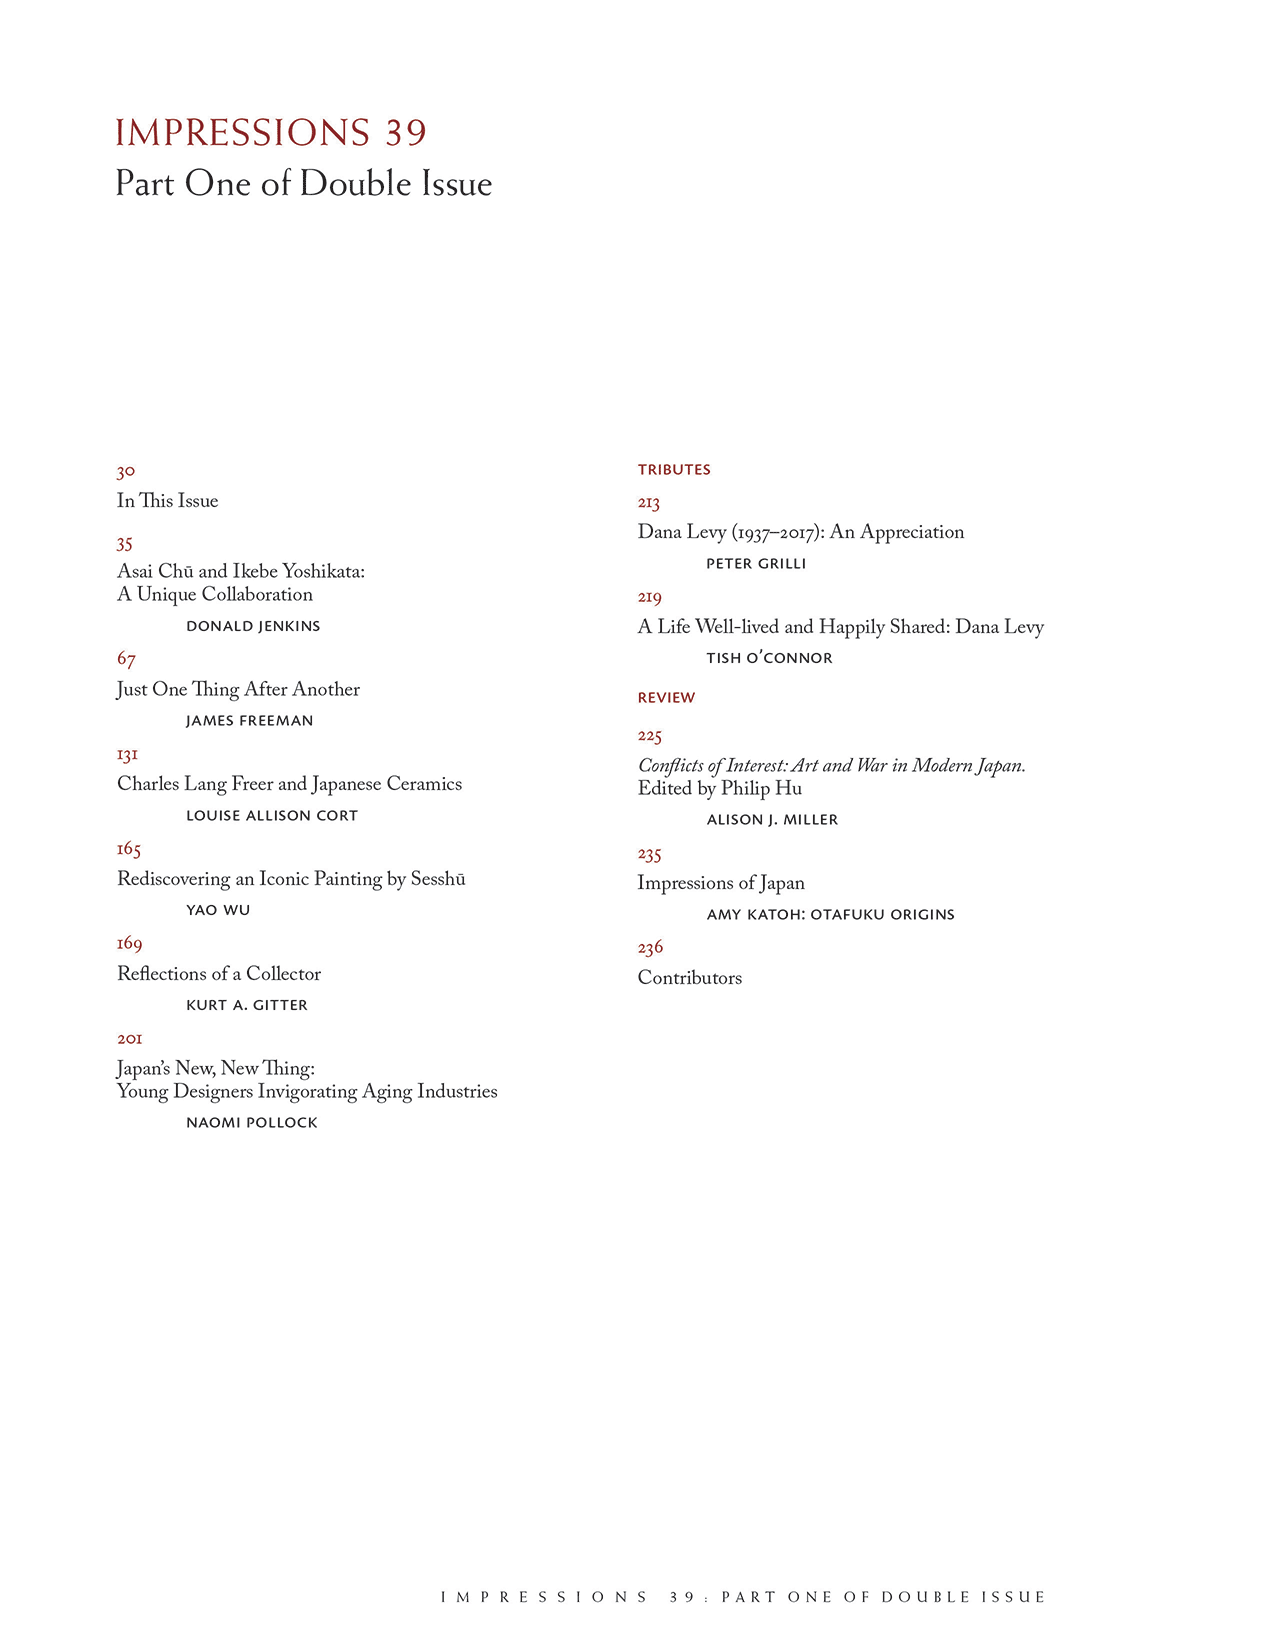 Impression 39 (2018), Part 1, Table of Contents